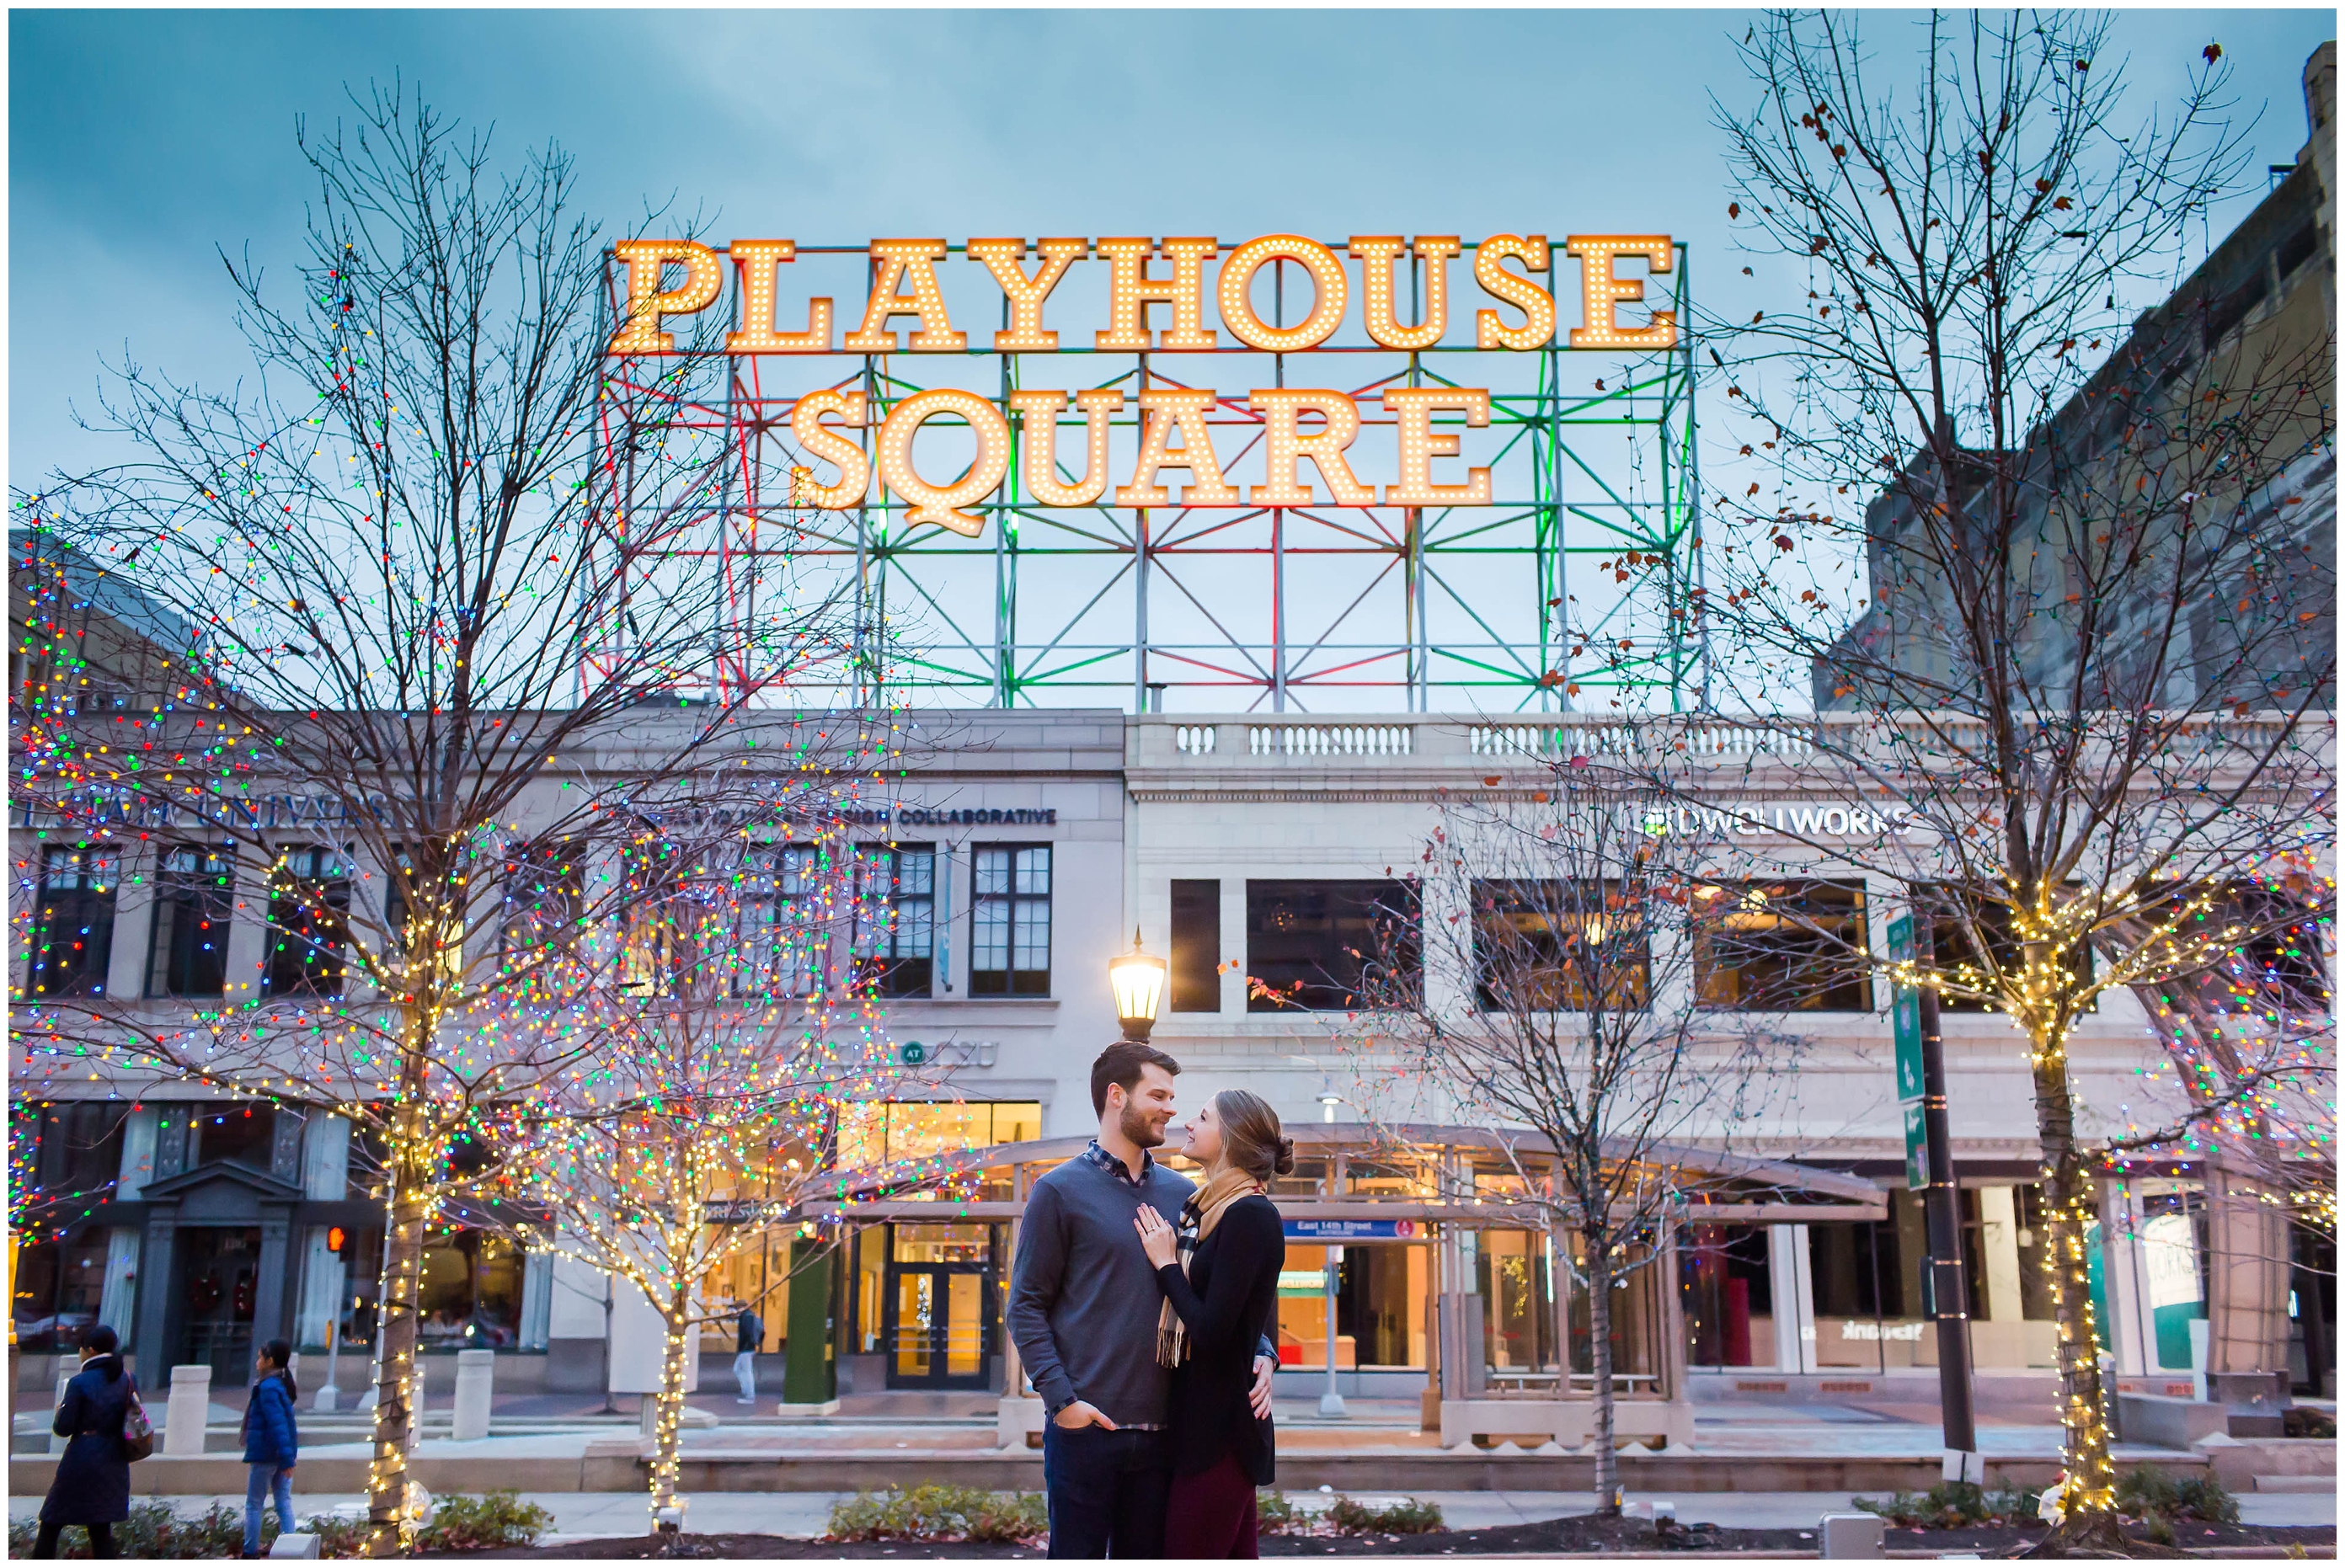 4th Street Arts Districts Cleveland,Cleveland Engagement Session,Playhouse Square,The Arcade Cleveland,loren jackson photography,photographer akron ohio,